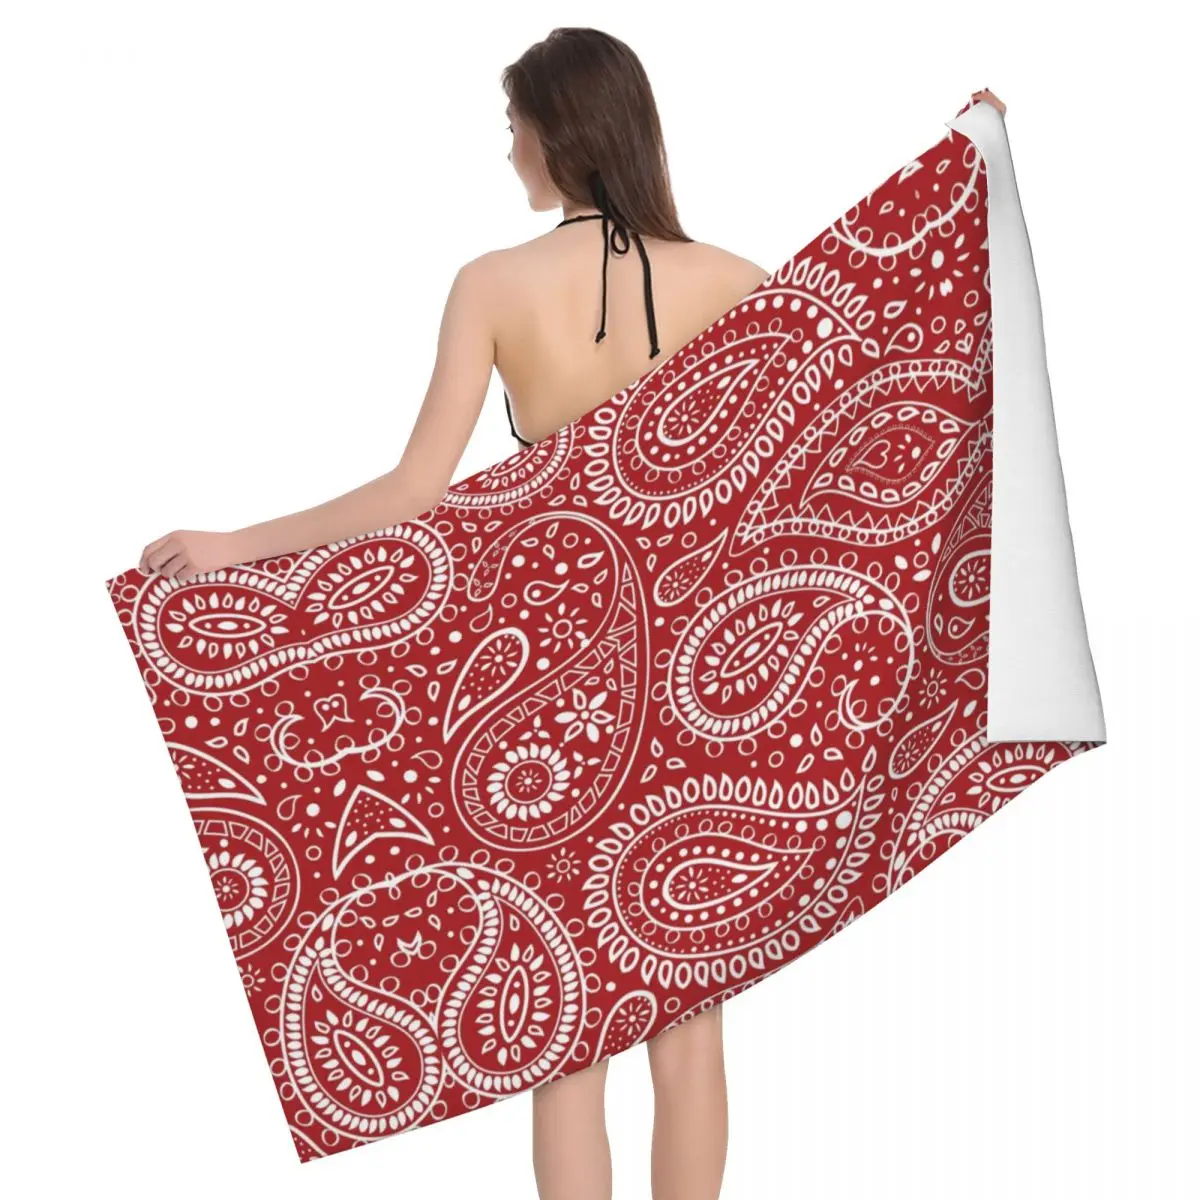 

Red And White Pretty Paisley Beach Towel Quick Drying Boho Bohemian Floral Art Soft Linen Microfiber Shower Sauna Towels